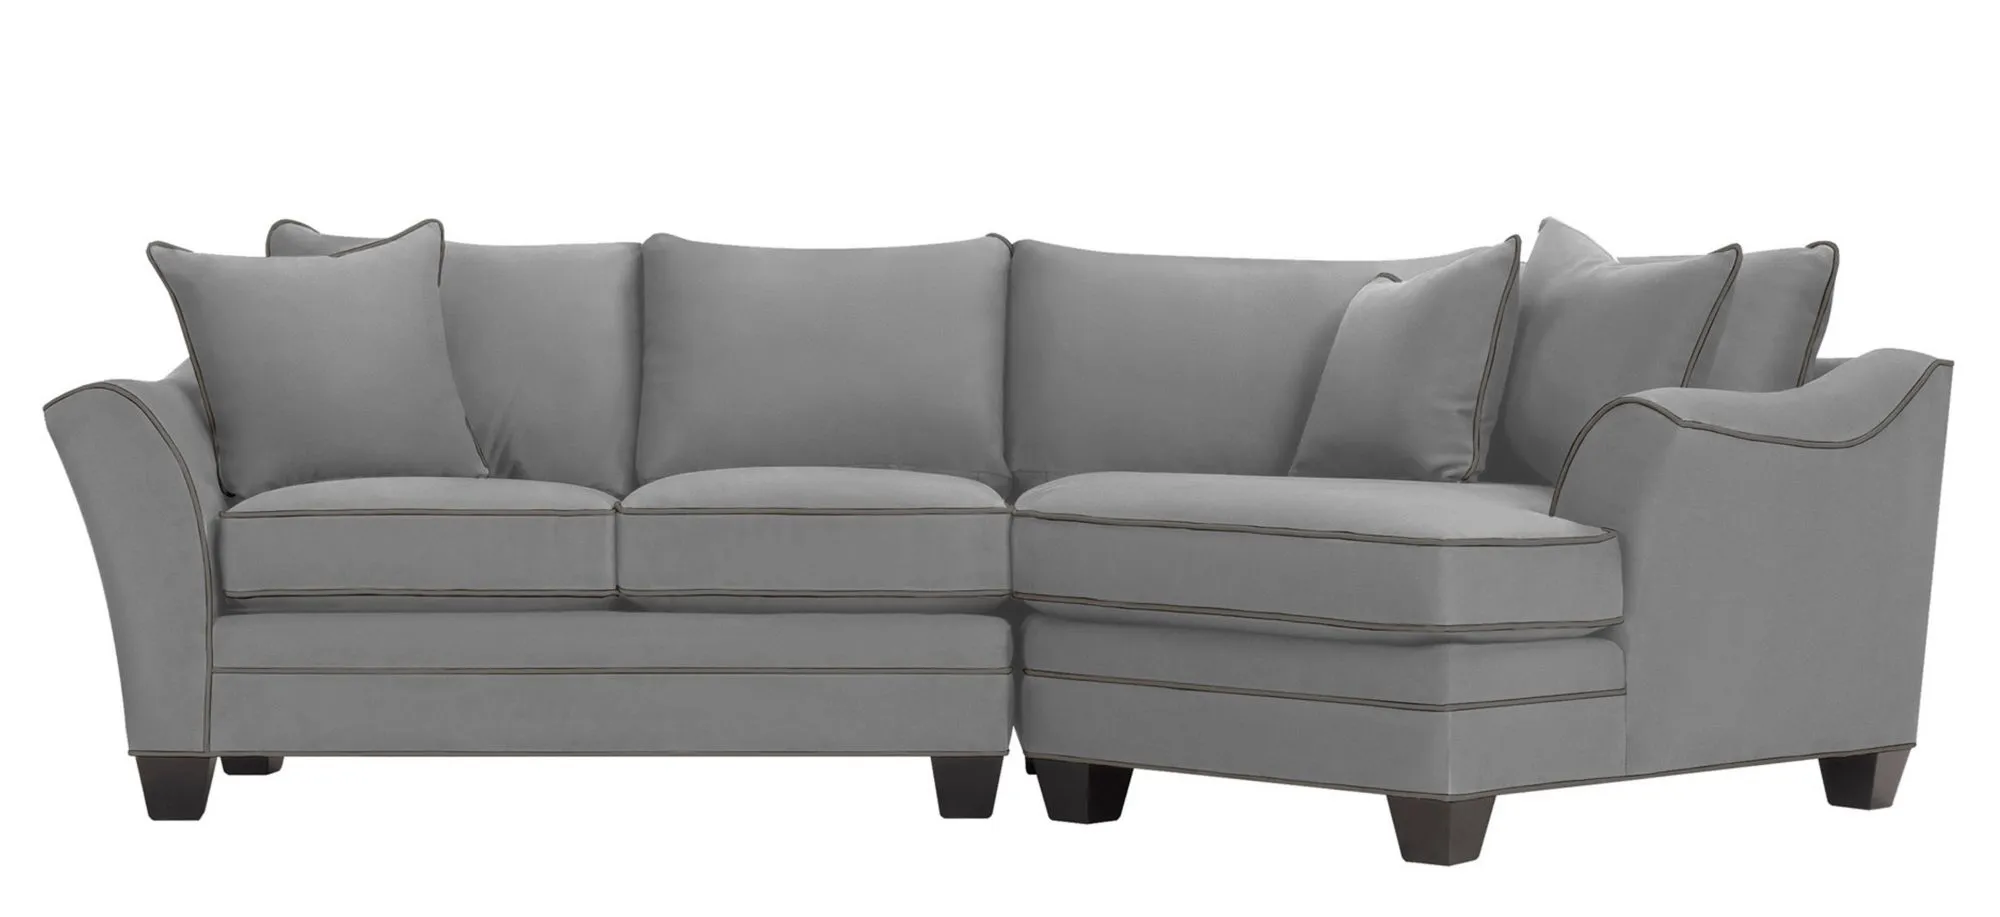 Foresthill 2-pc. Right Hand Cuddler Sectional Sofa in Suede So Soft Platinum/Slate by H.M. Richards